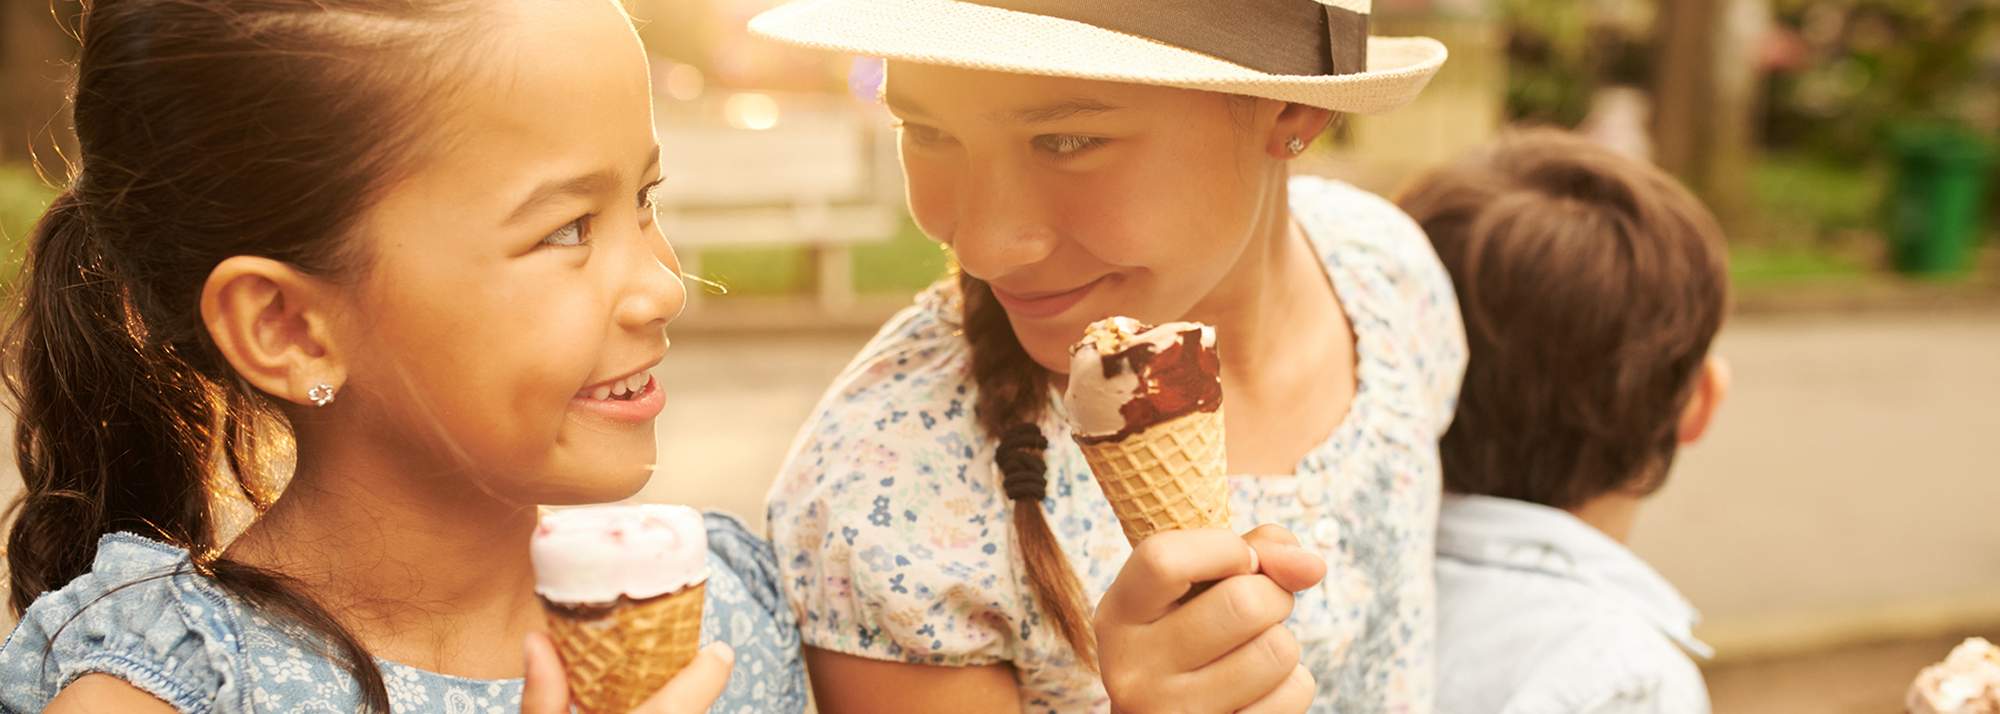 Making friends in your new community sharing an ice cream